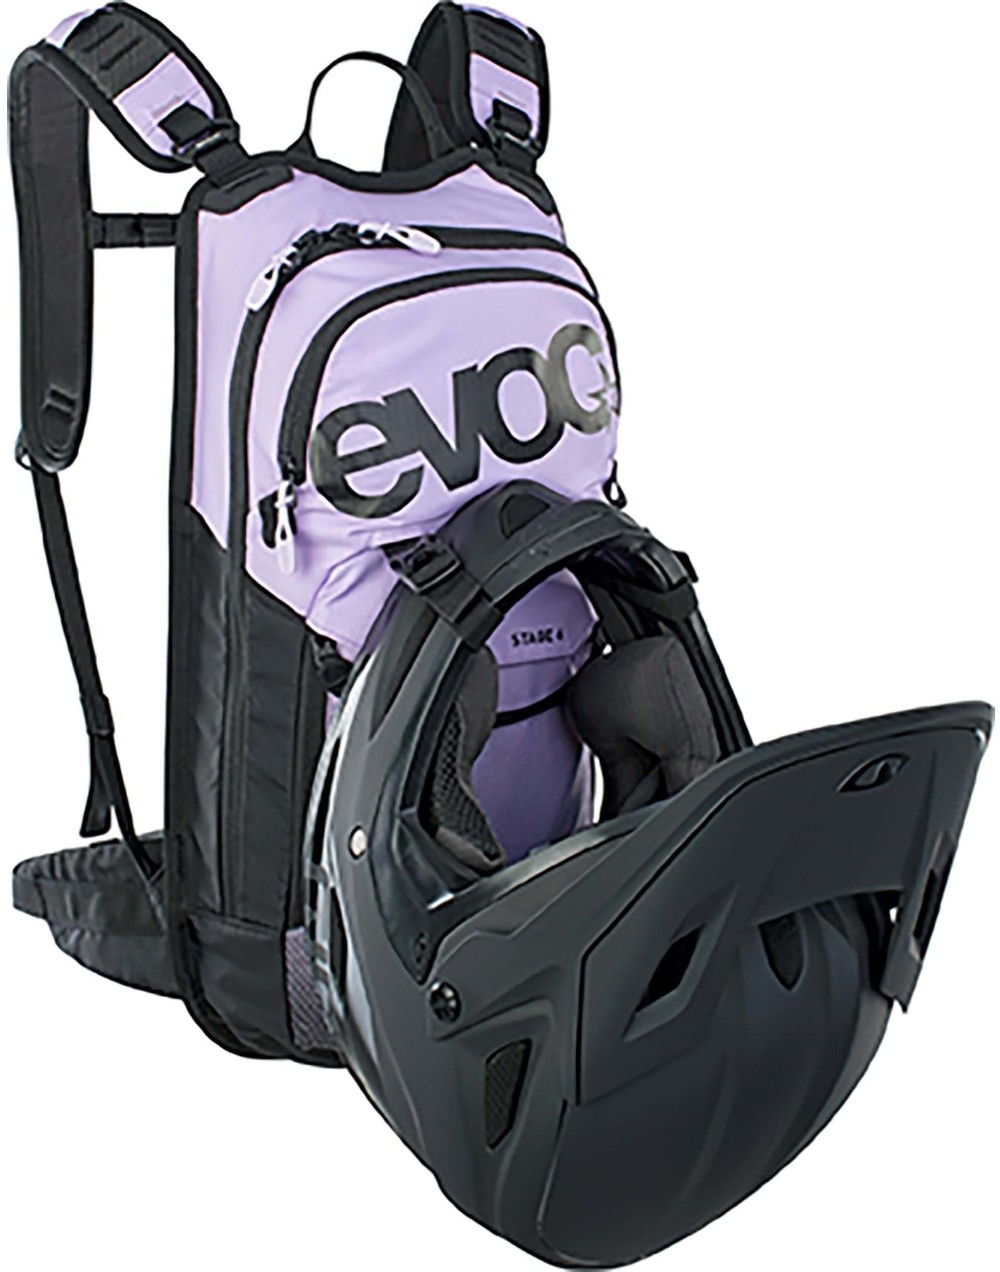 Stage 6L Performance Backpack image 1